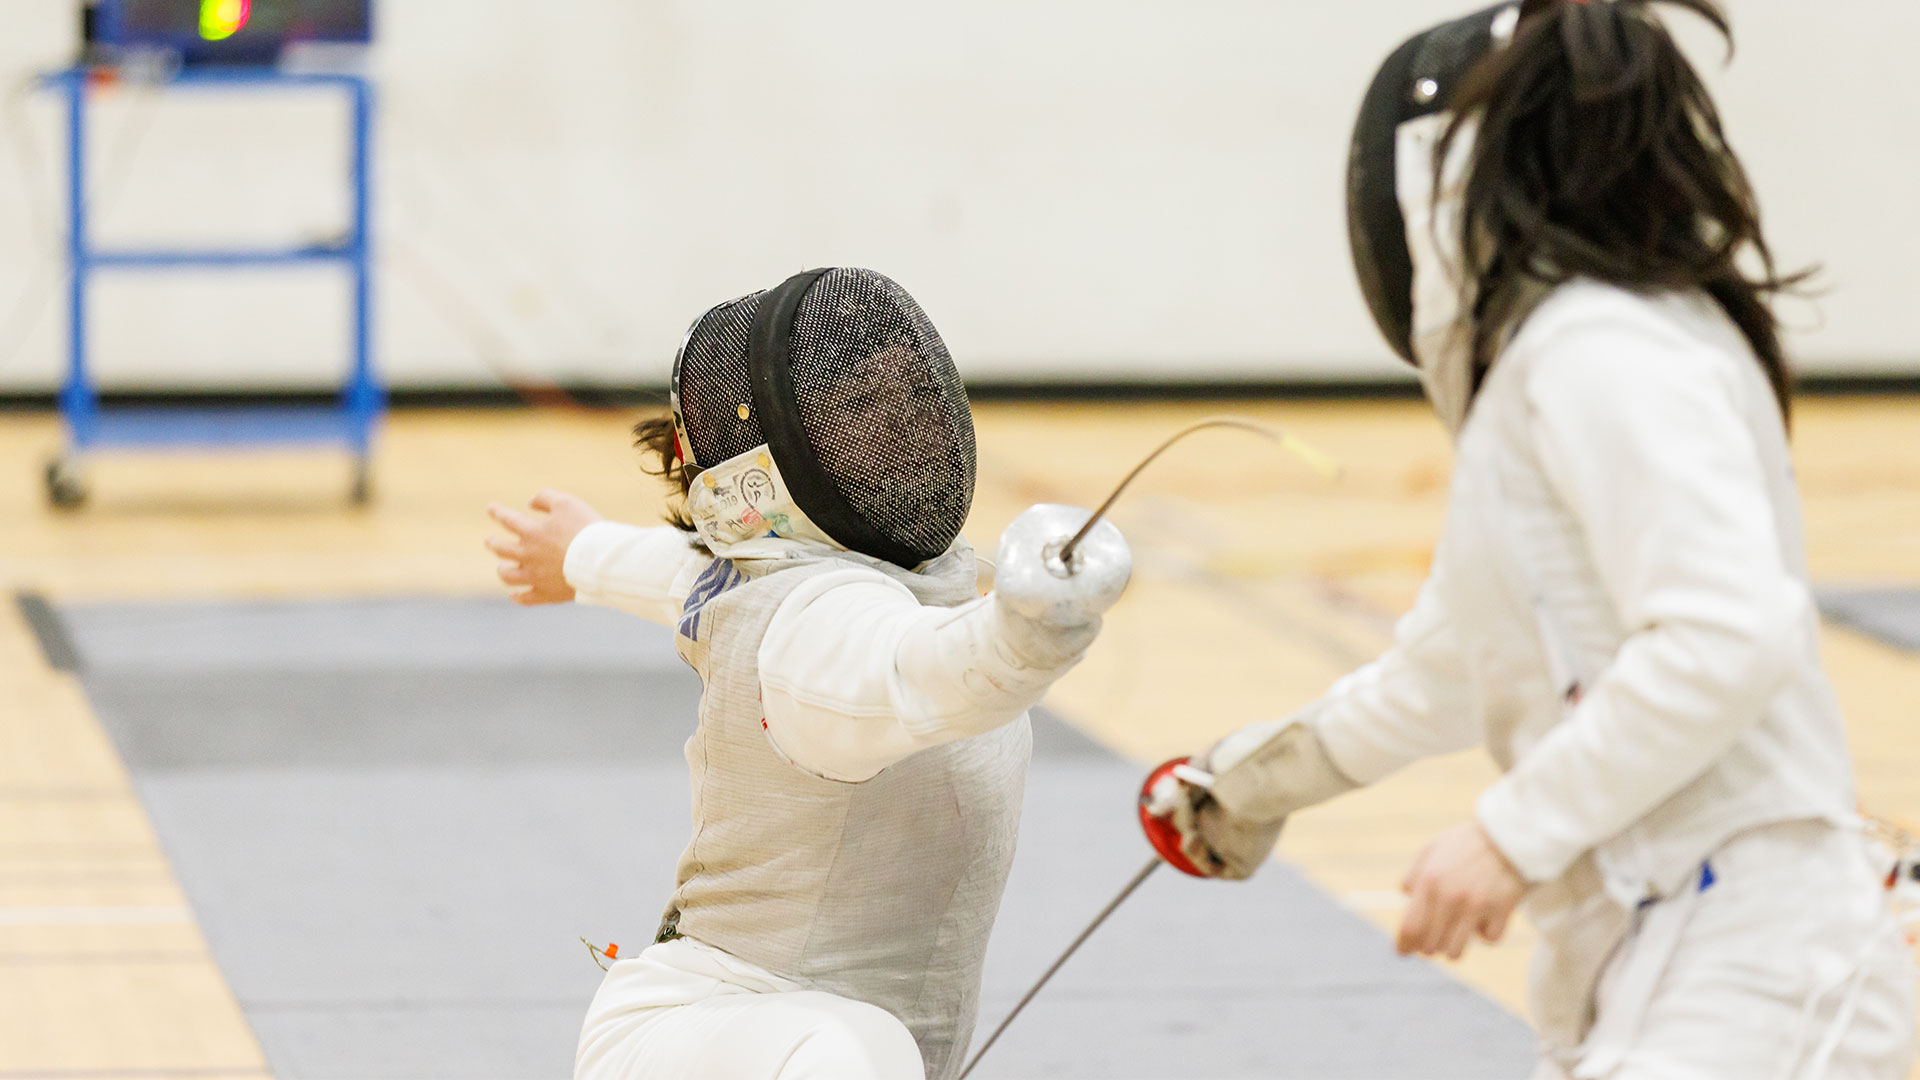 Wellesley fencing will host the NEIFC Championships on Saturday